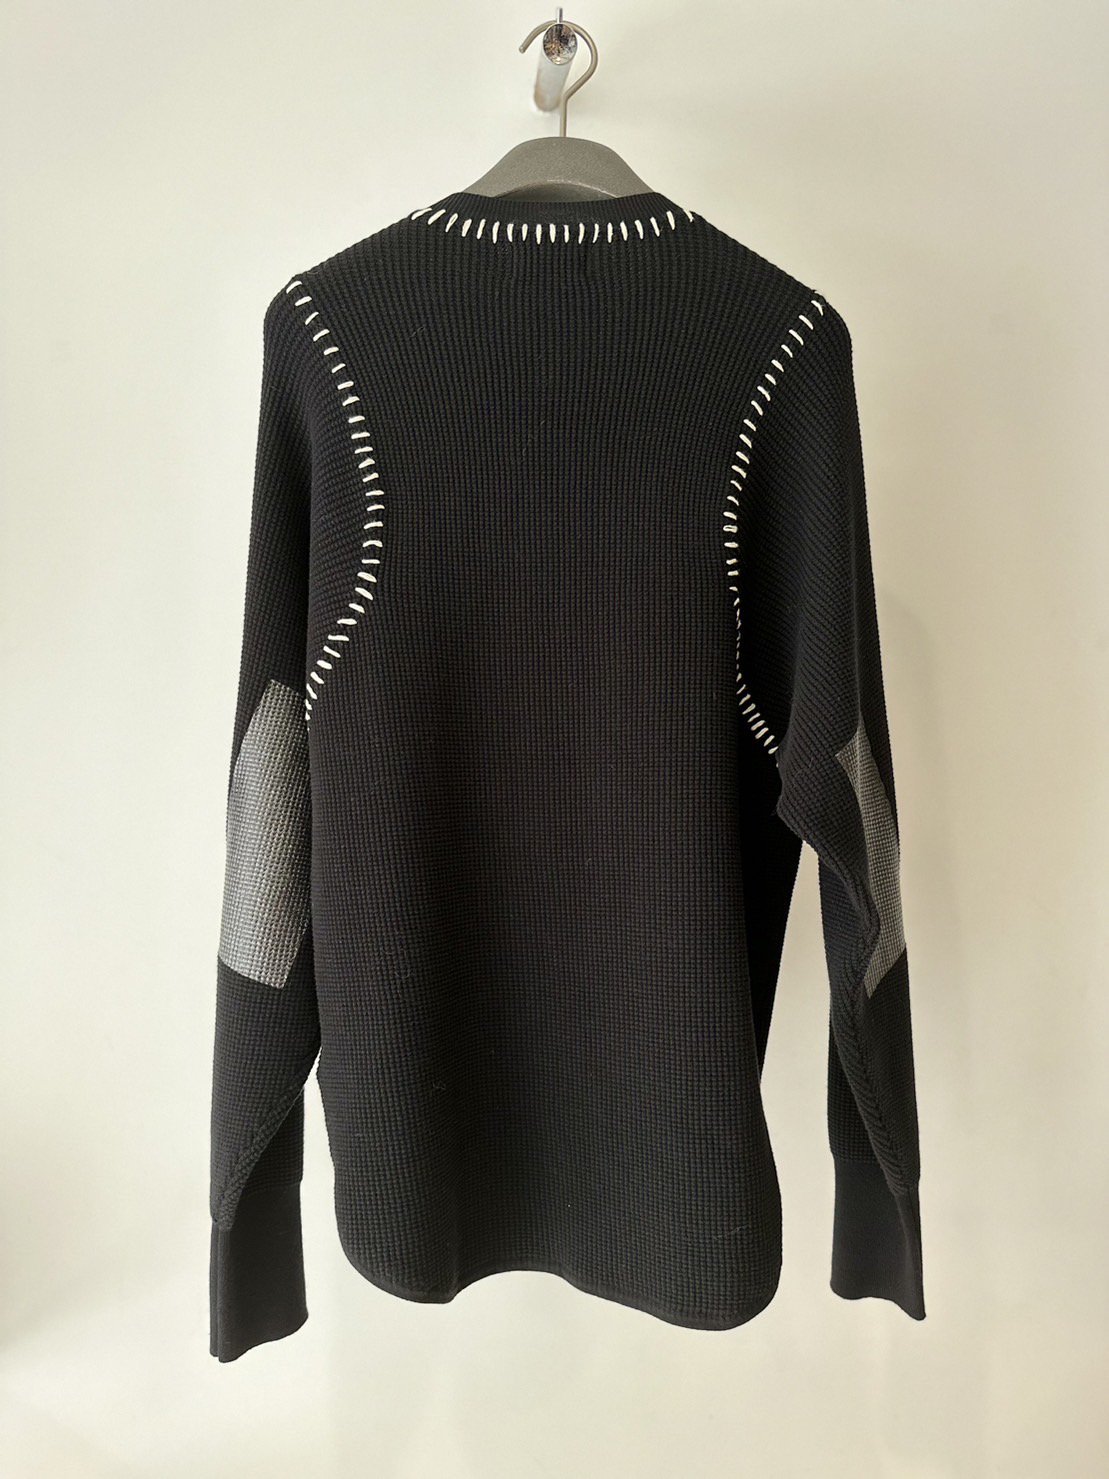 soduk<br />thermal knit pullover / black<img class='new_mark_img2' src='https://img.shop-pro.jp/img/new/icons14.gif' style='border:none;display:inline;margin:0px;padding:0px;width:auto;' />